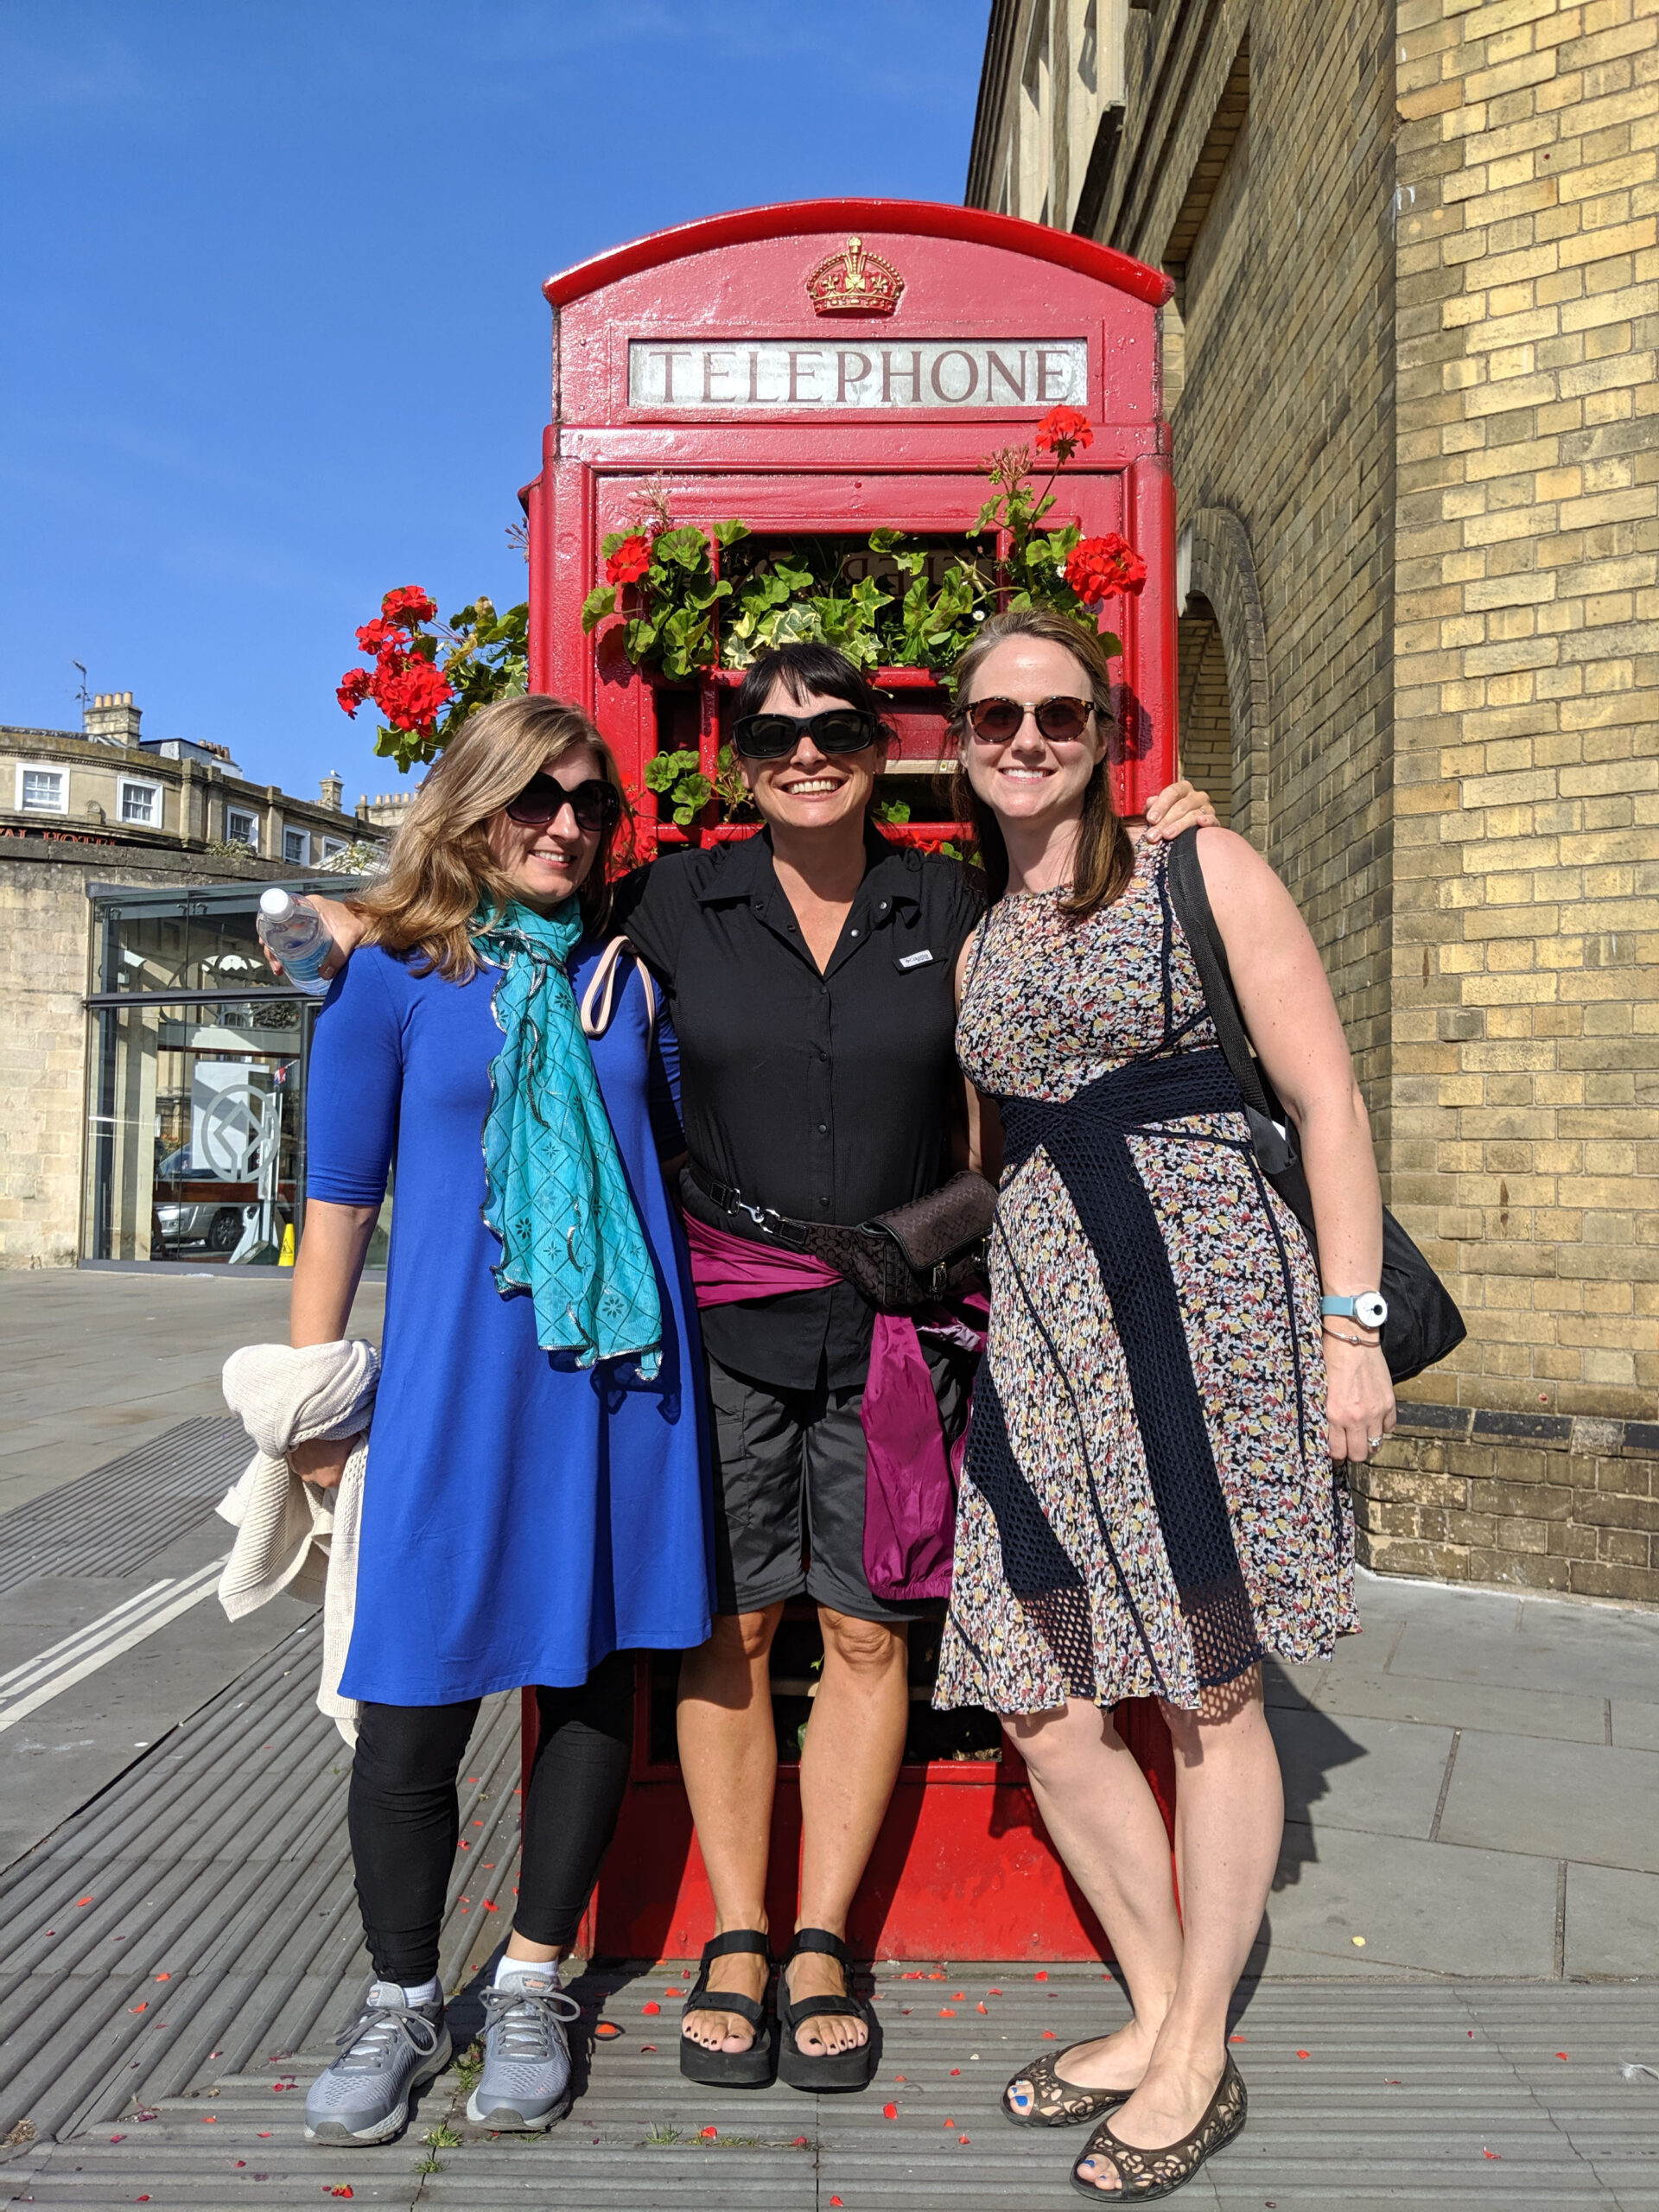 Three women pose in front of telephone booth